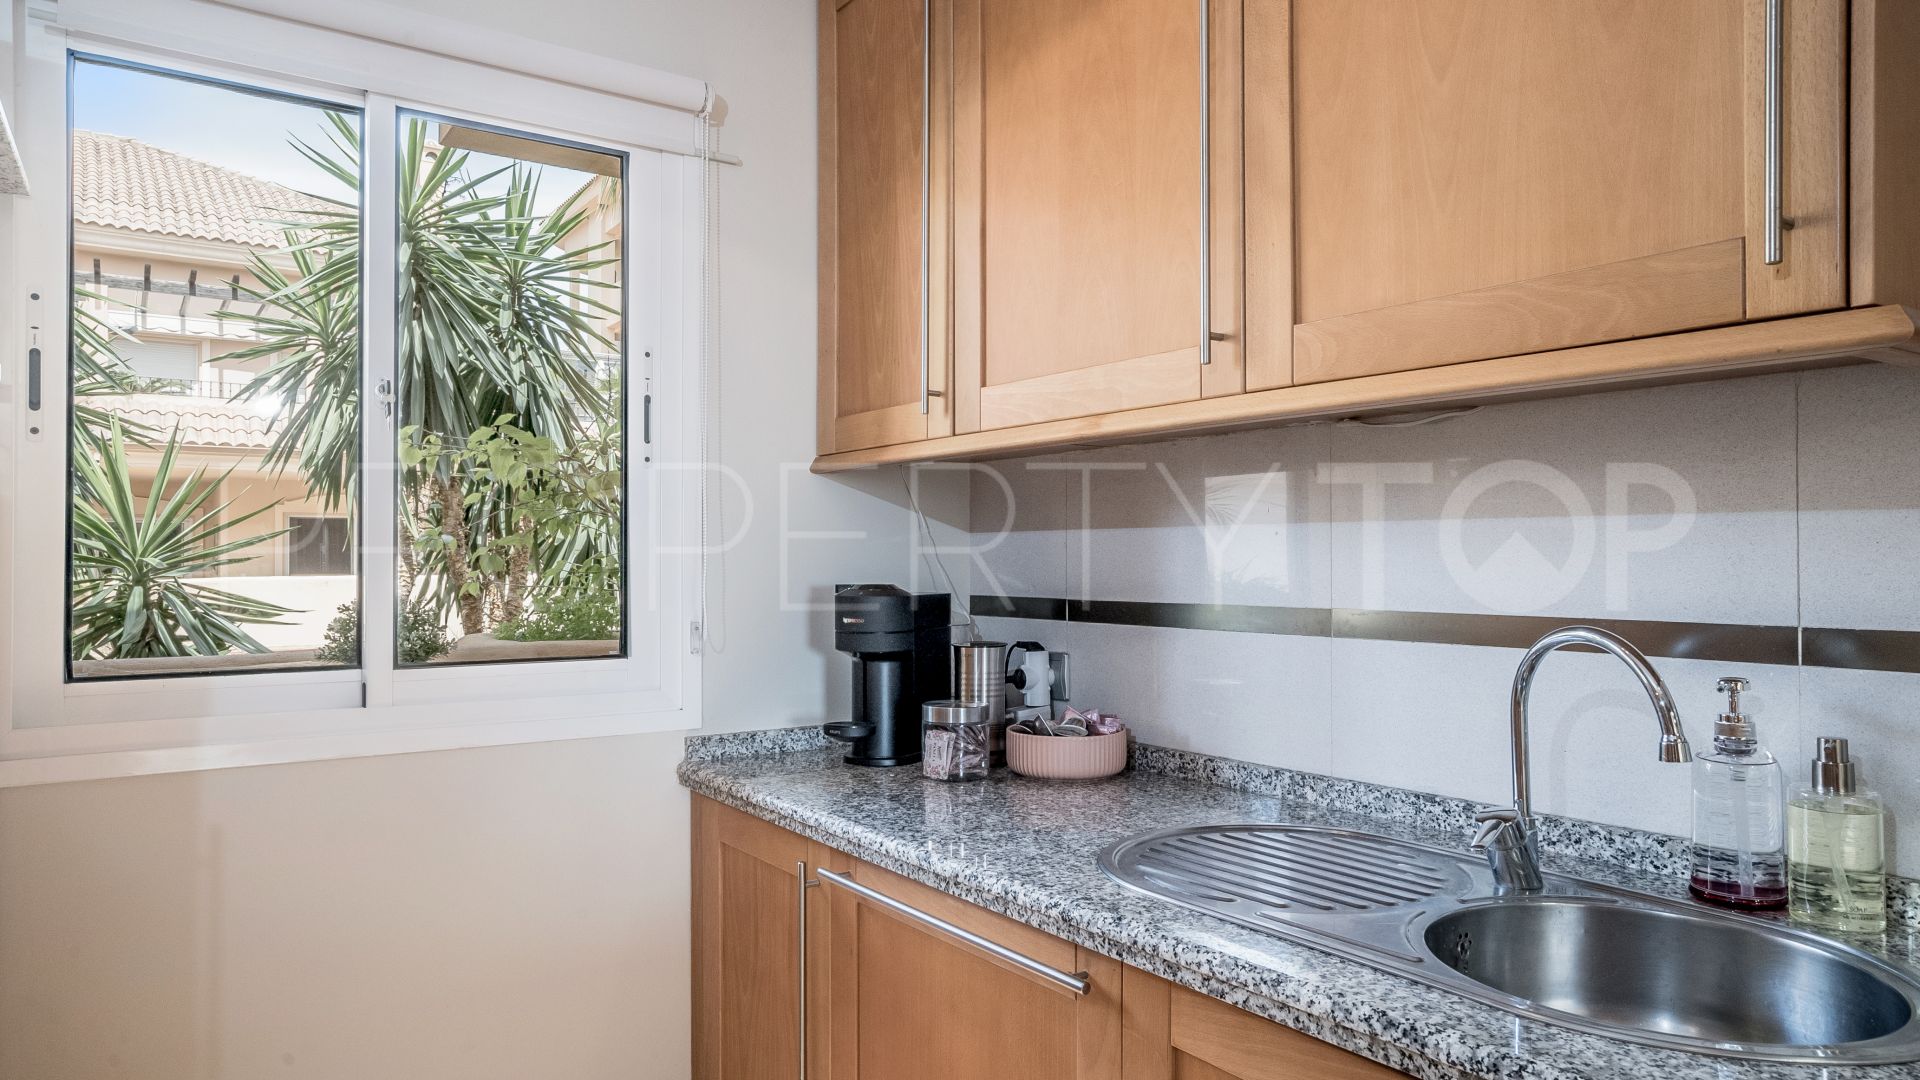 2 bedrooms Aloha Hill Club apartment for sale